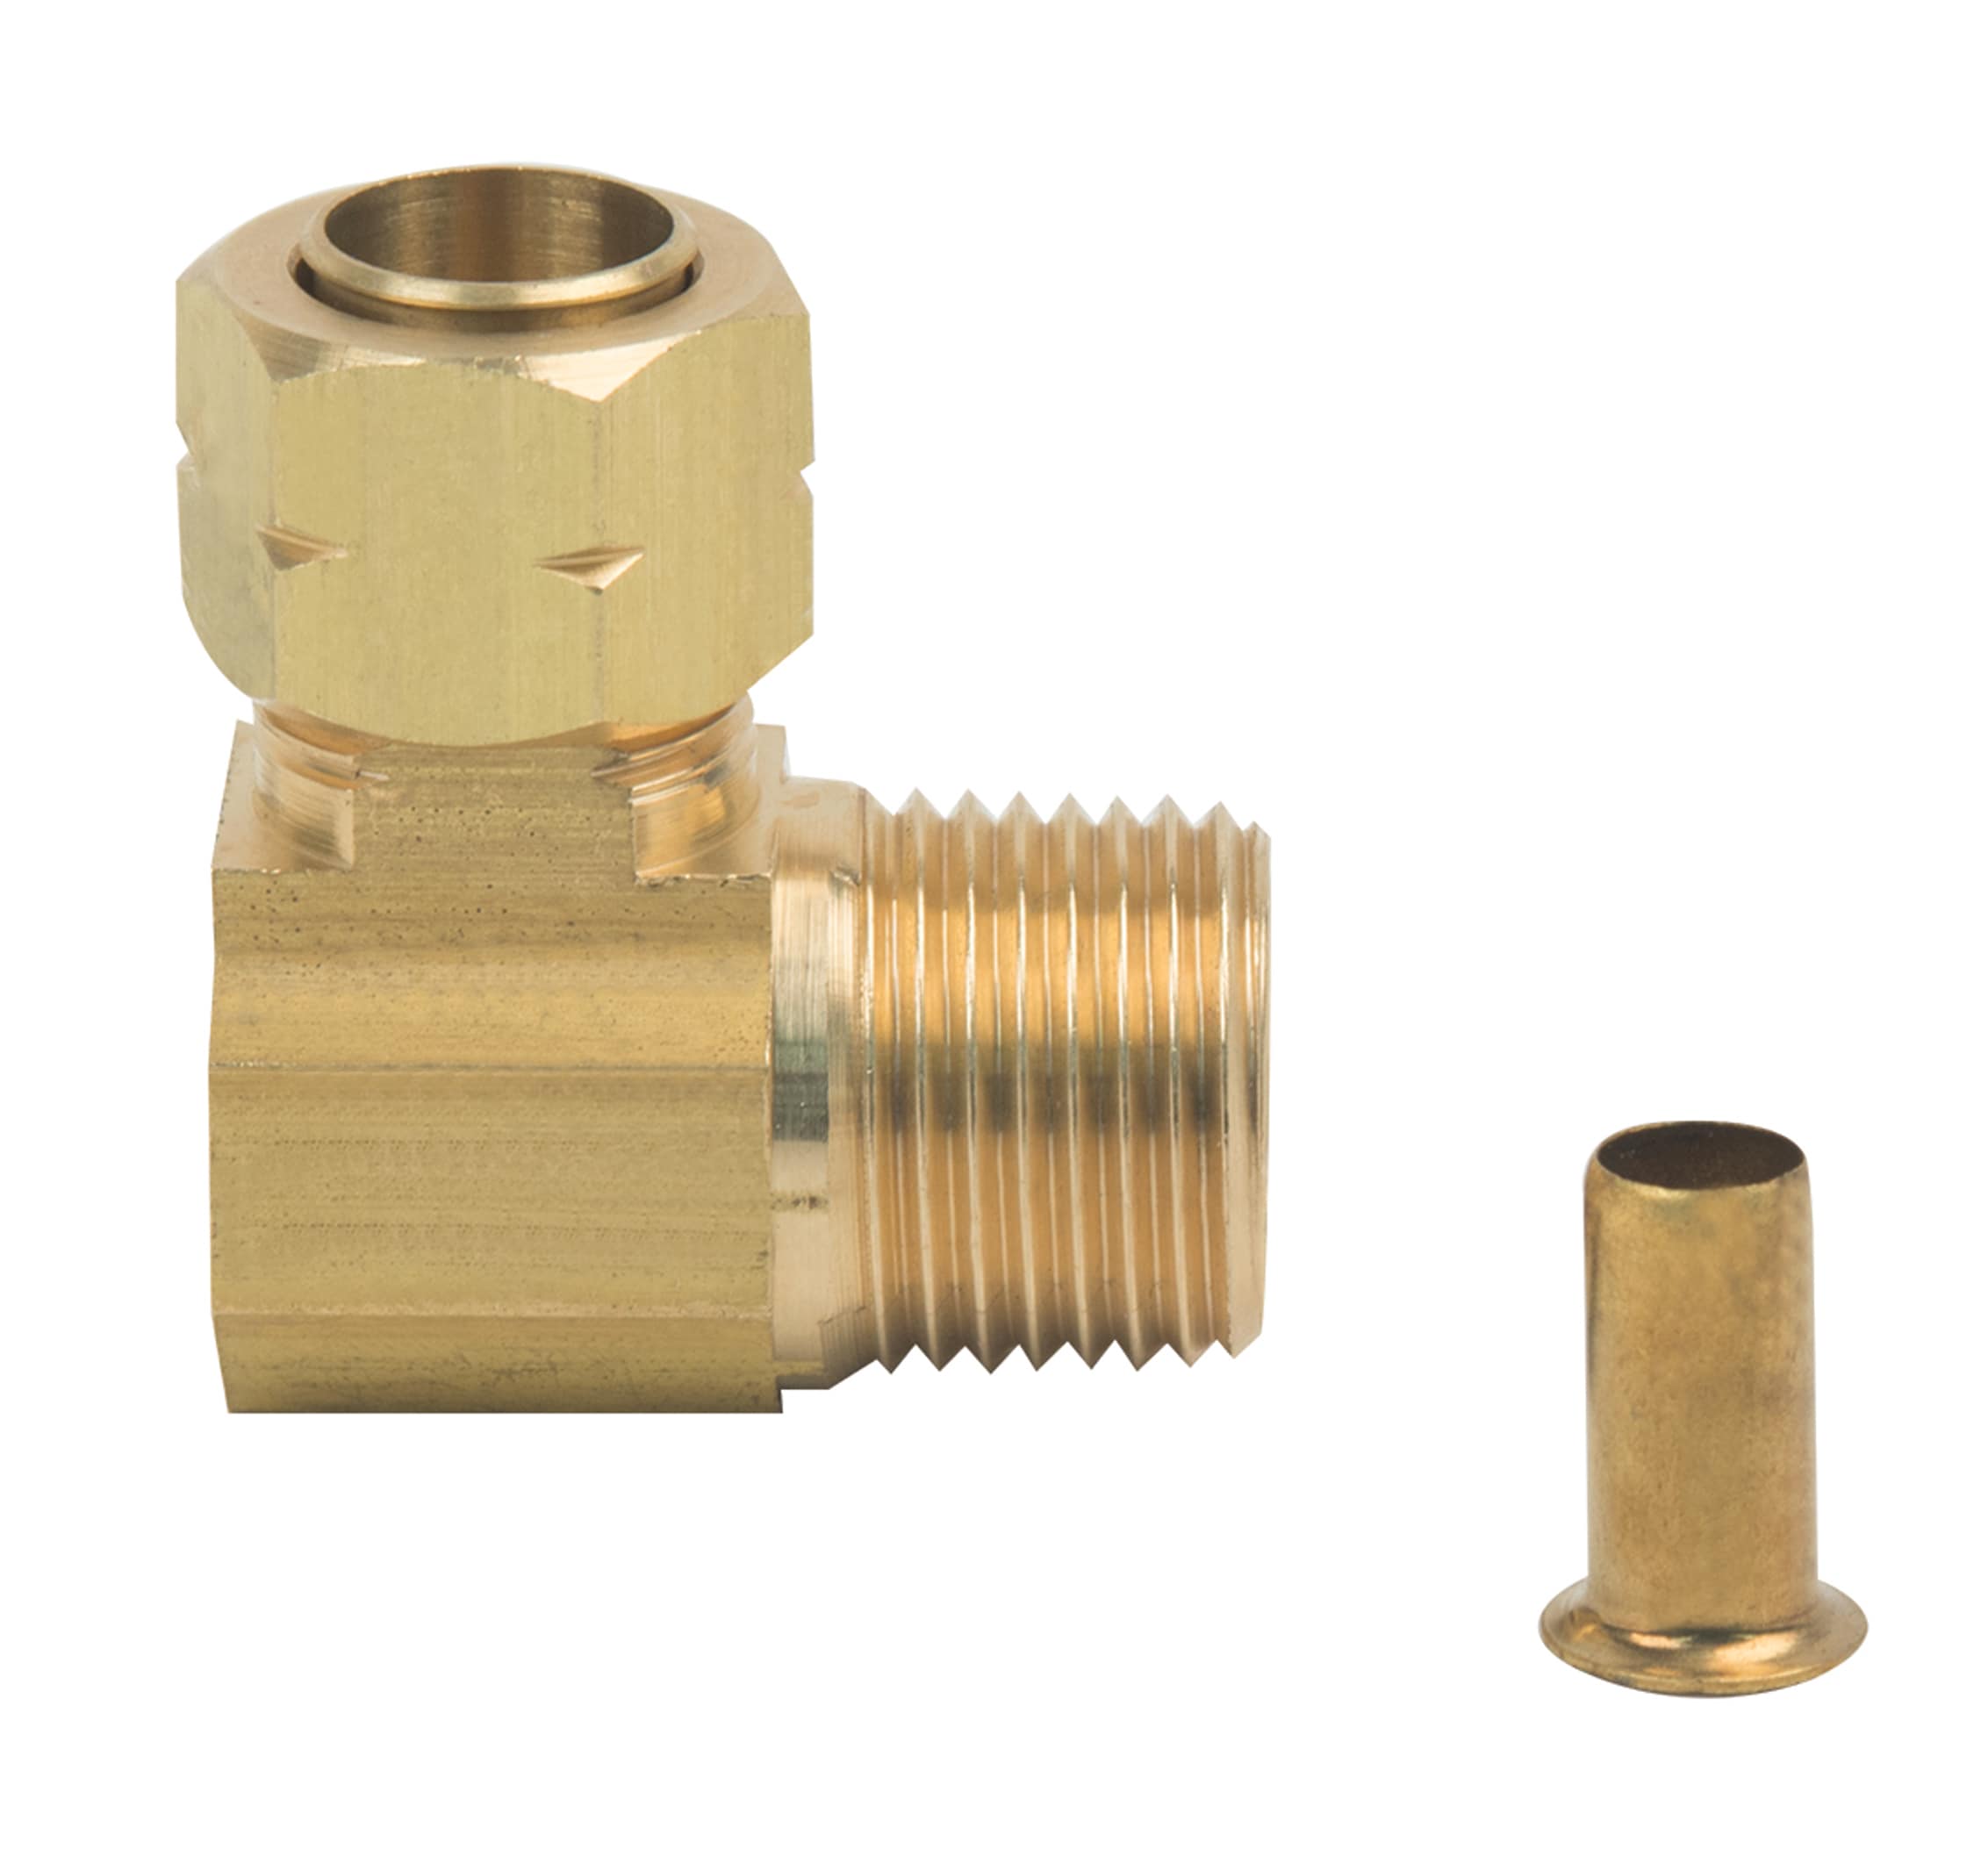 Lead Free Brass Compression Fittings - Union Elbows - 3/4 T O.D.